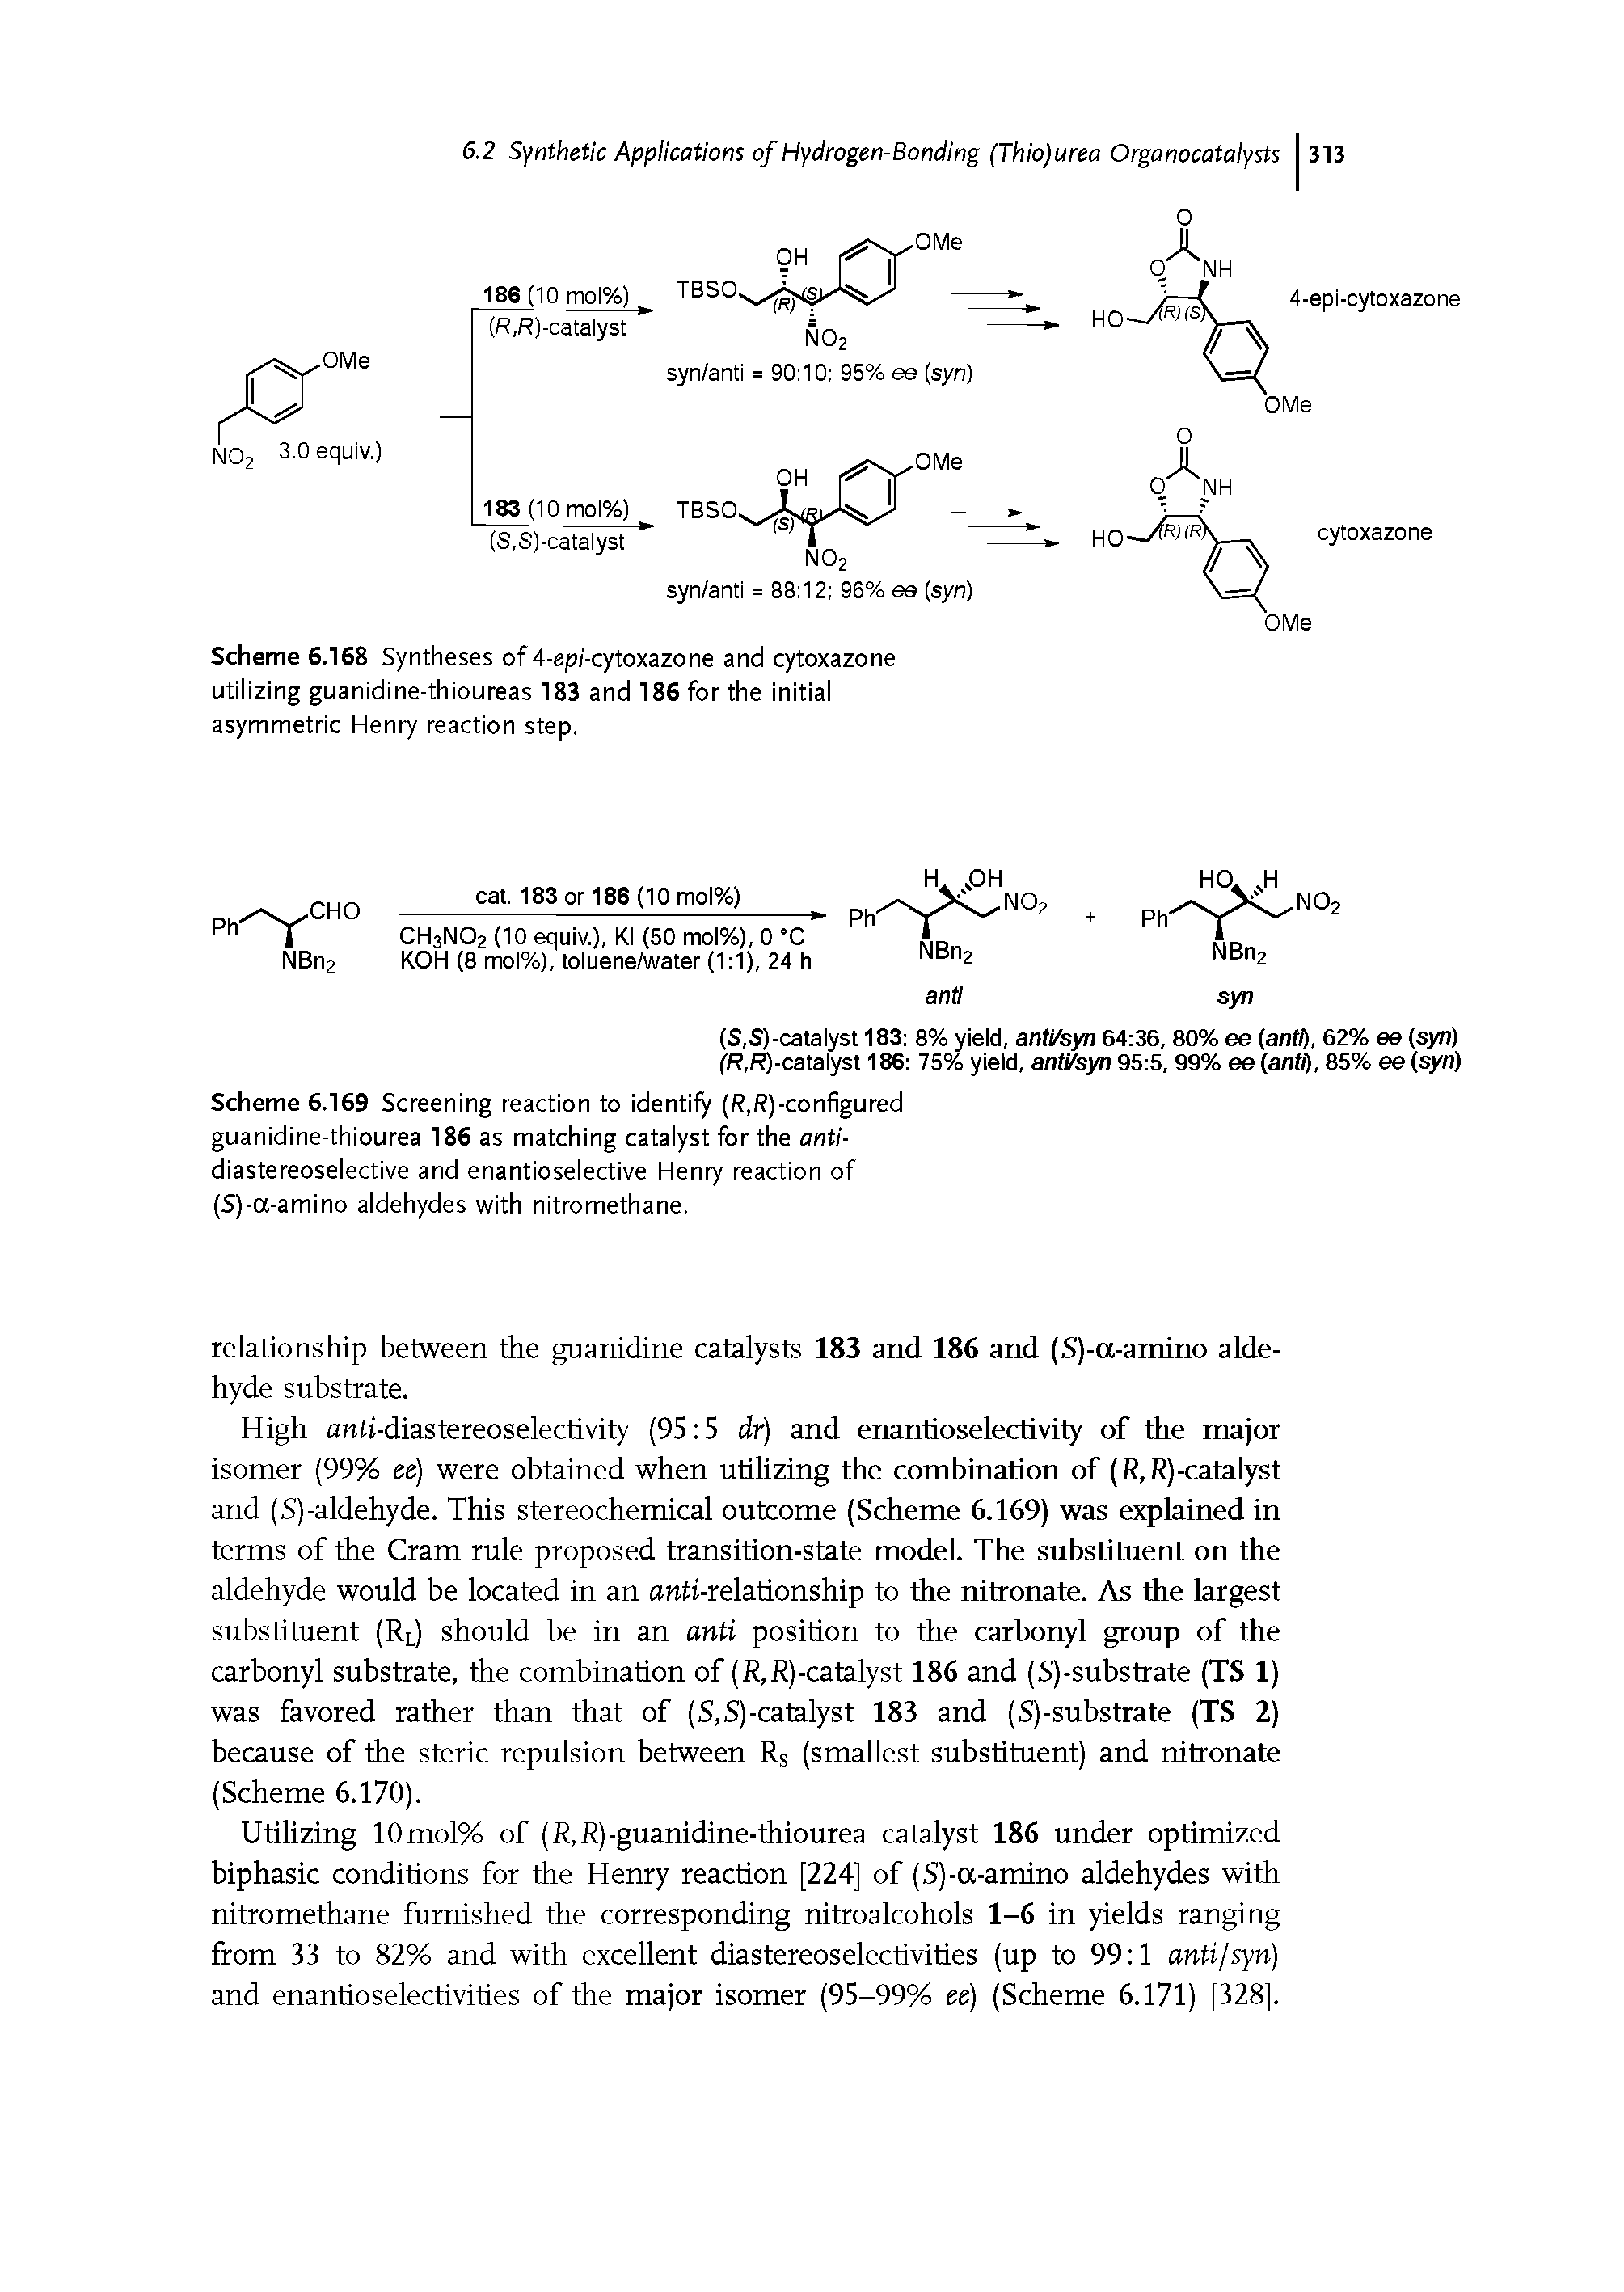 Scheme 6.168 Syntheses of 4-ep/-cytoxazone and cytoxazone utilizing guanidine-thioureas 183 and 186 for the initial asymmetric Henry reaction step.